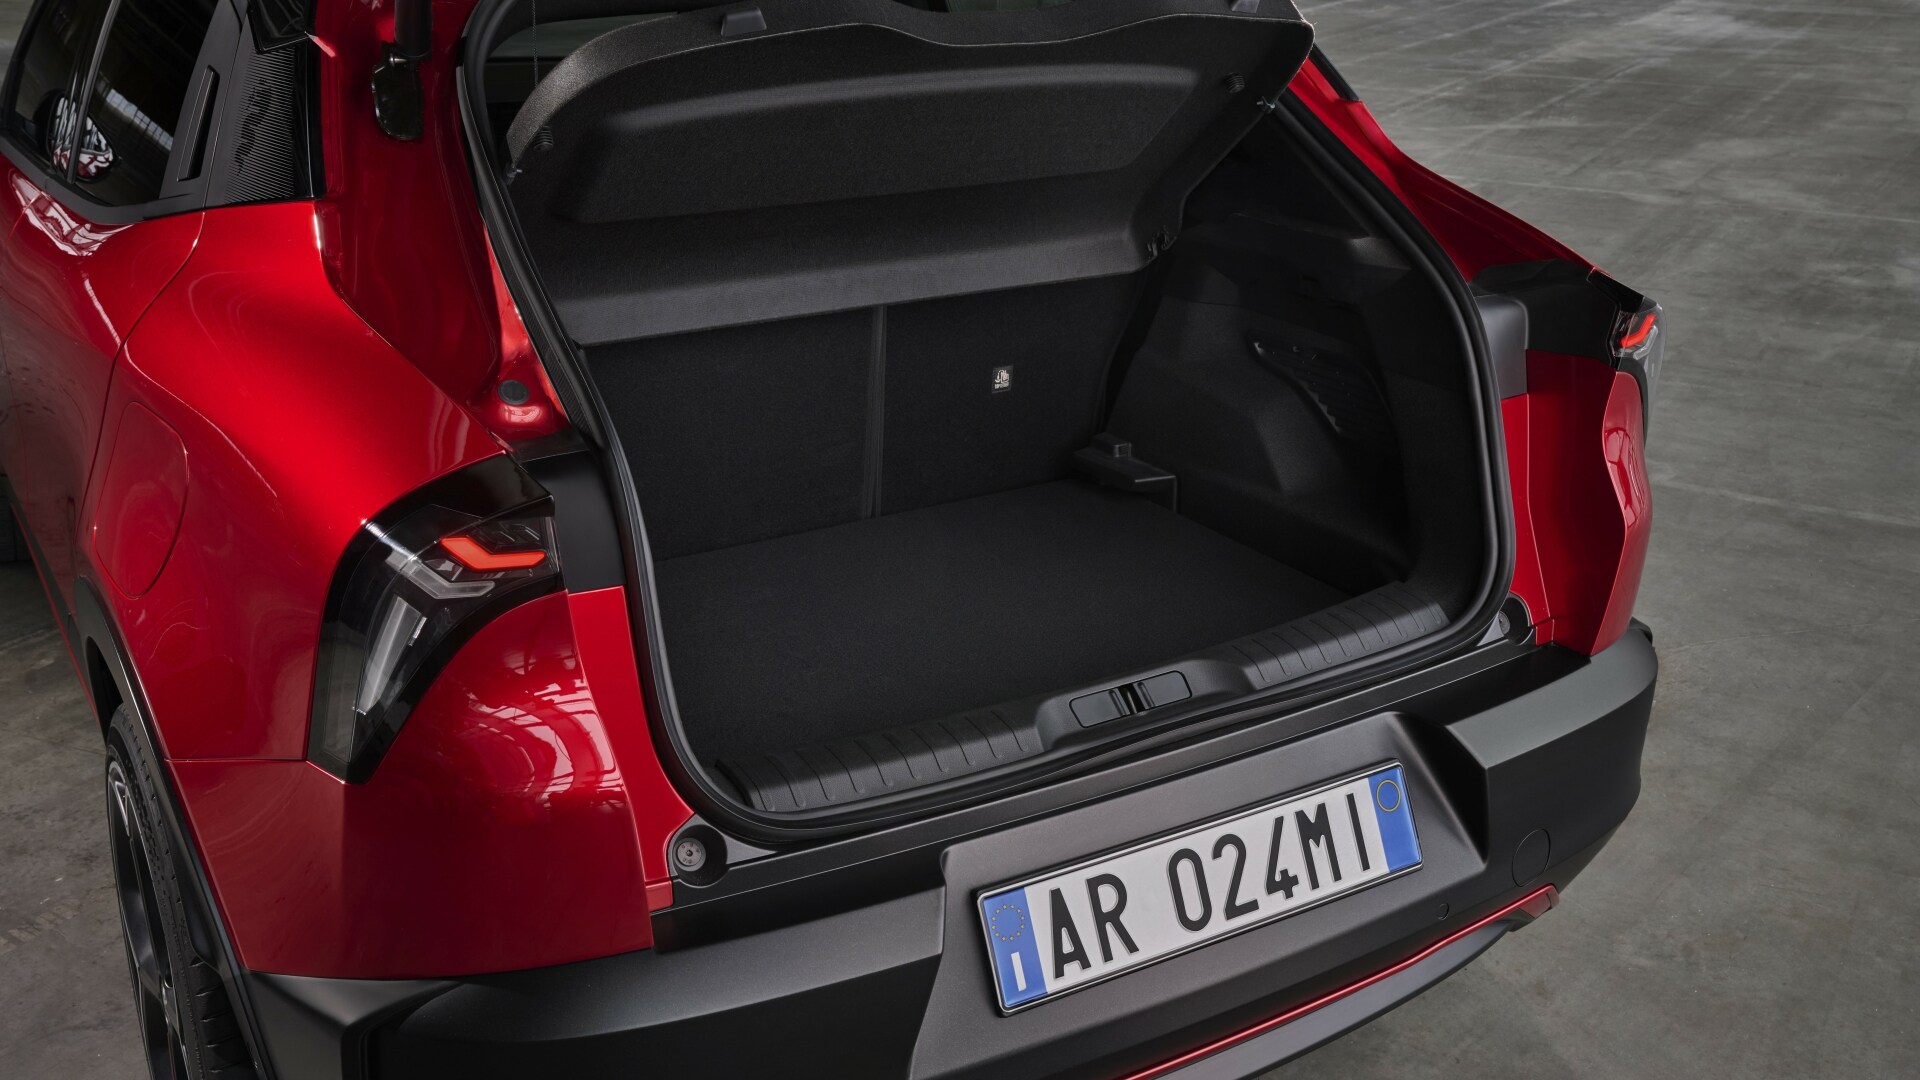 The Boot Space That Comes With The Alfa Romeo Milano (Credits Stellantis Communications)